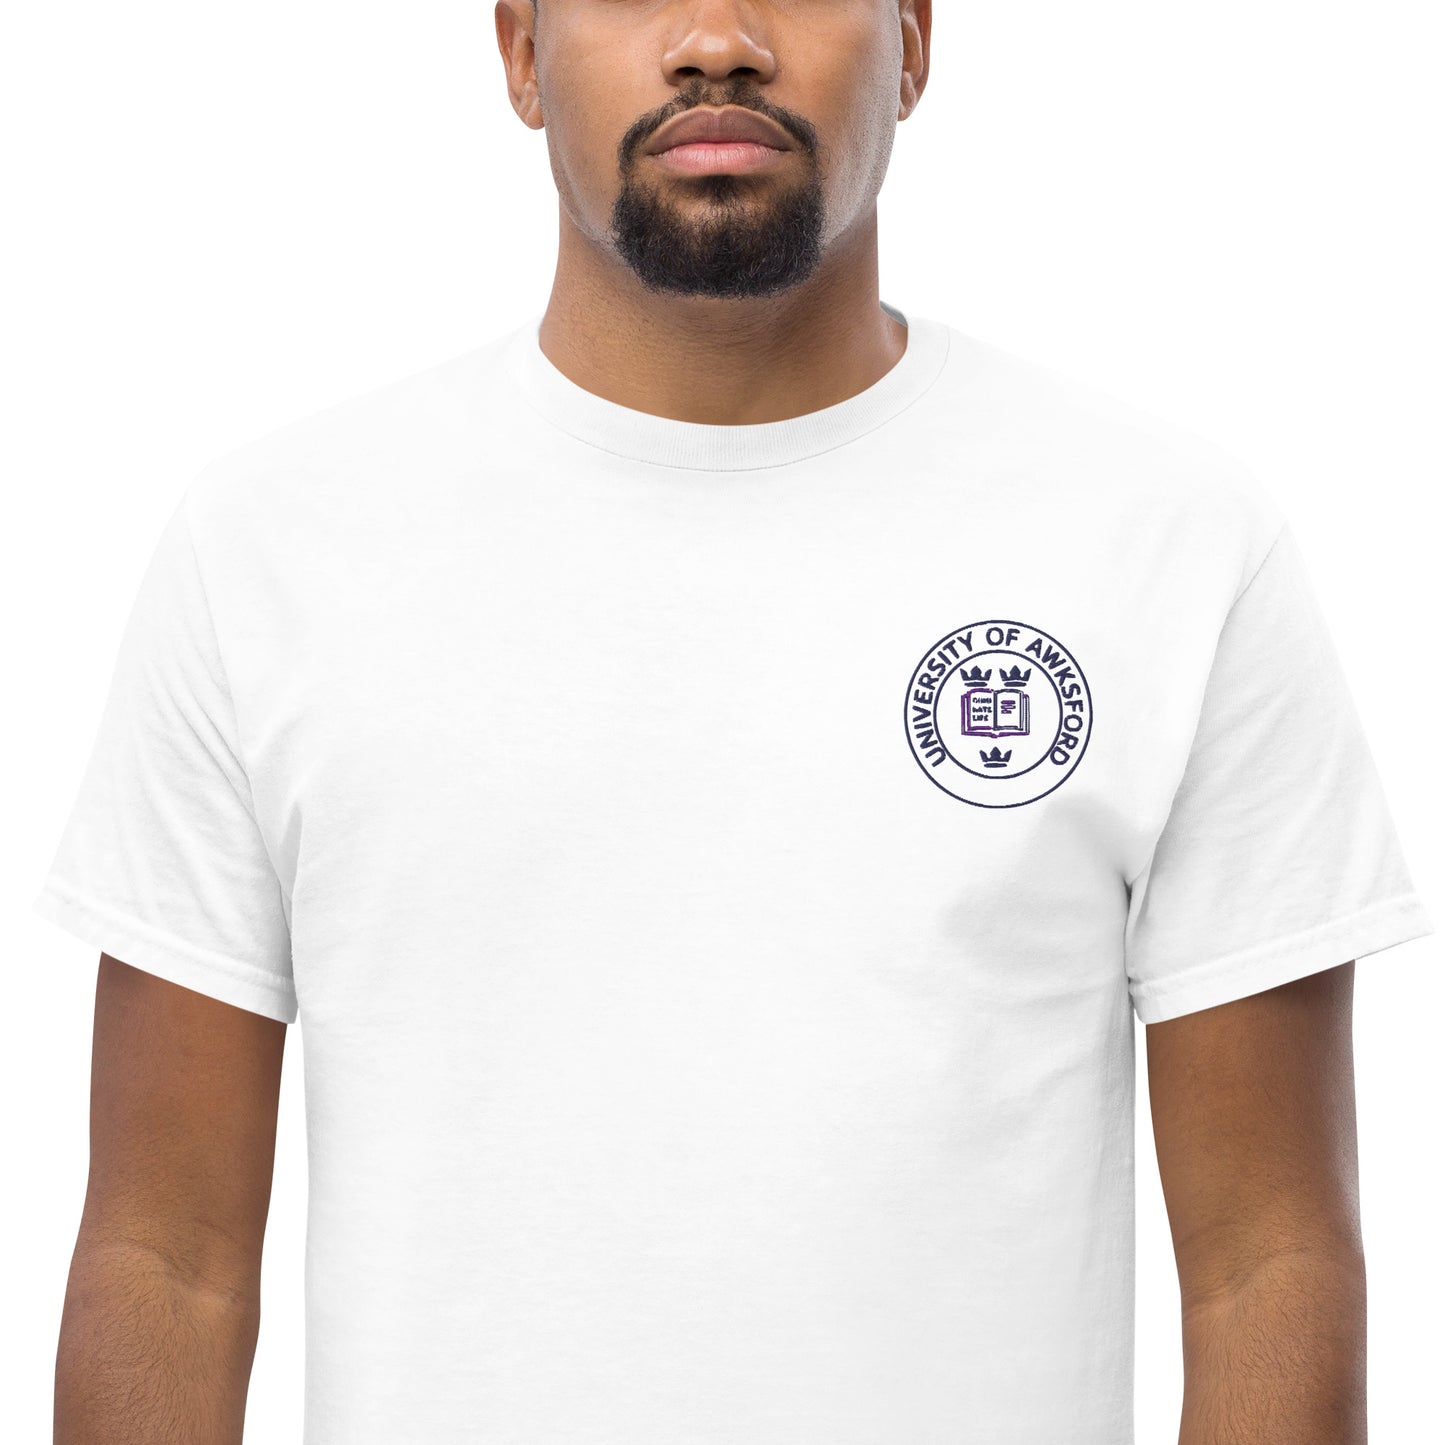 Men's Awksford classic tee